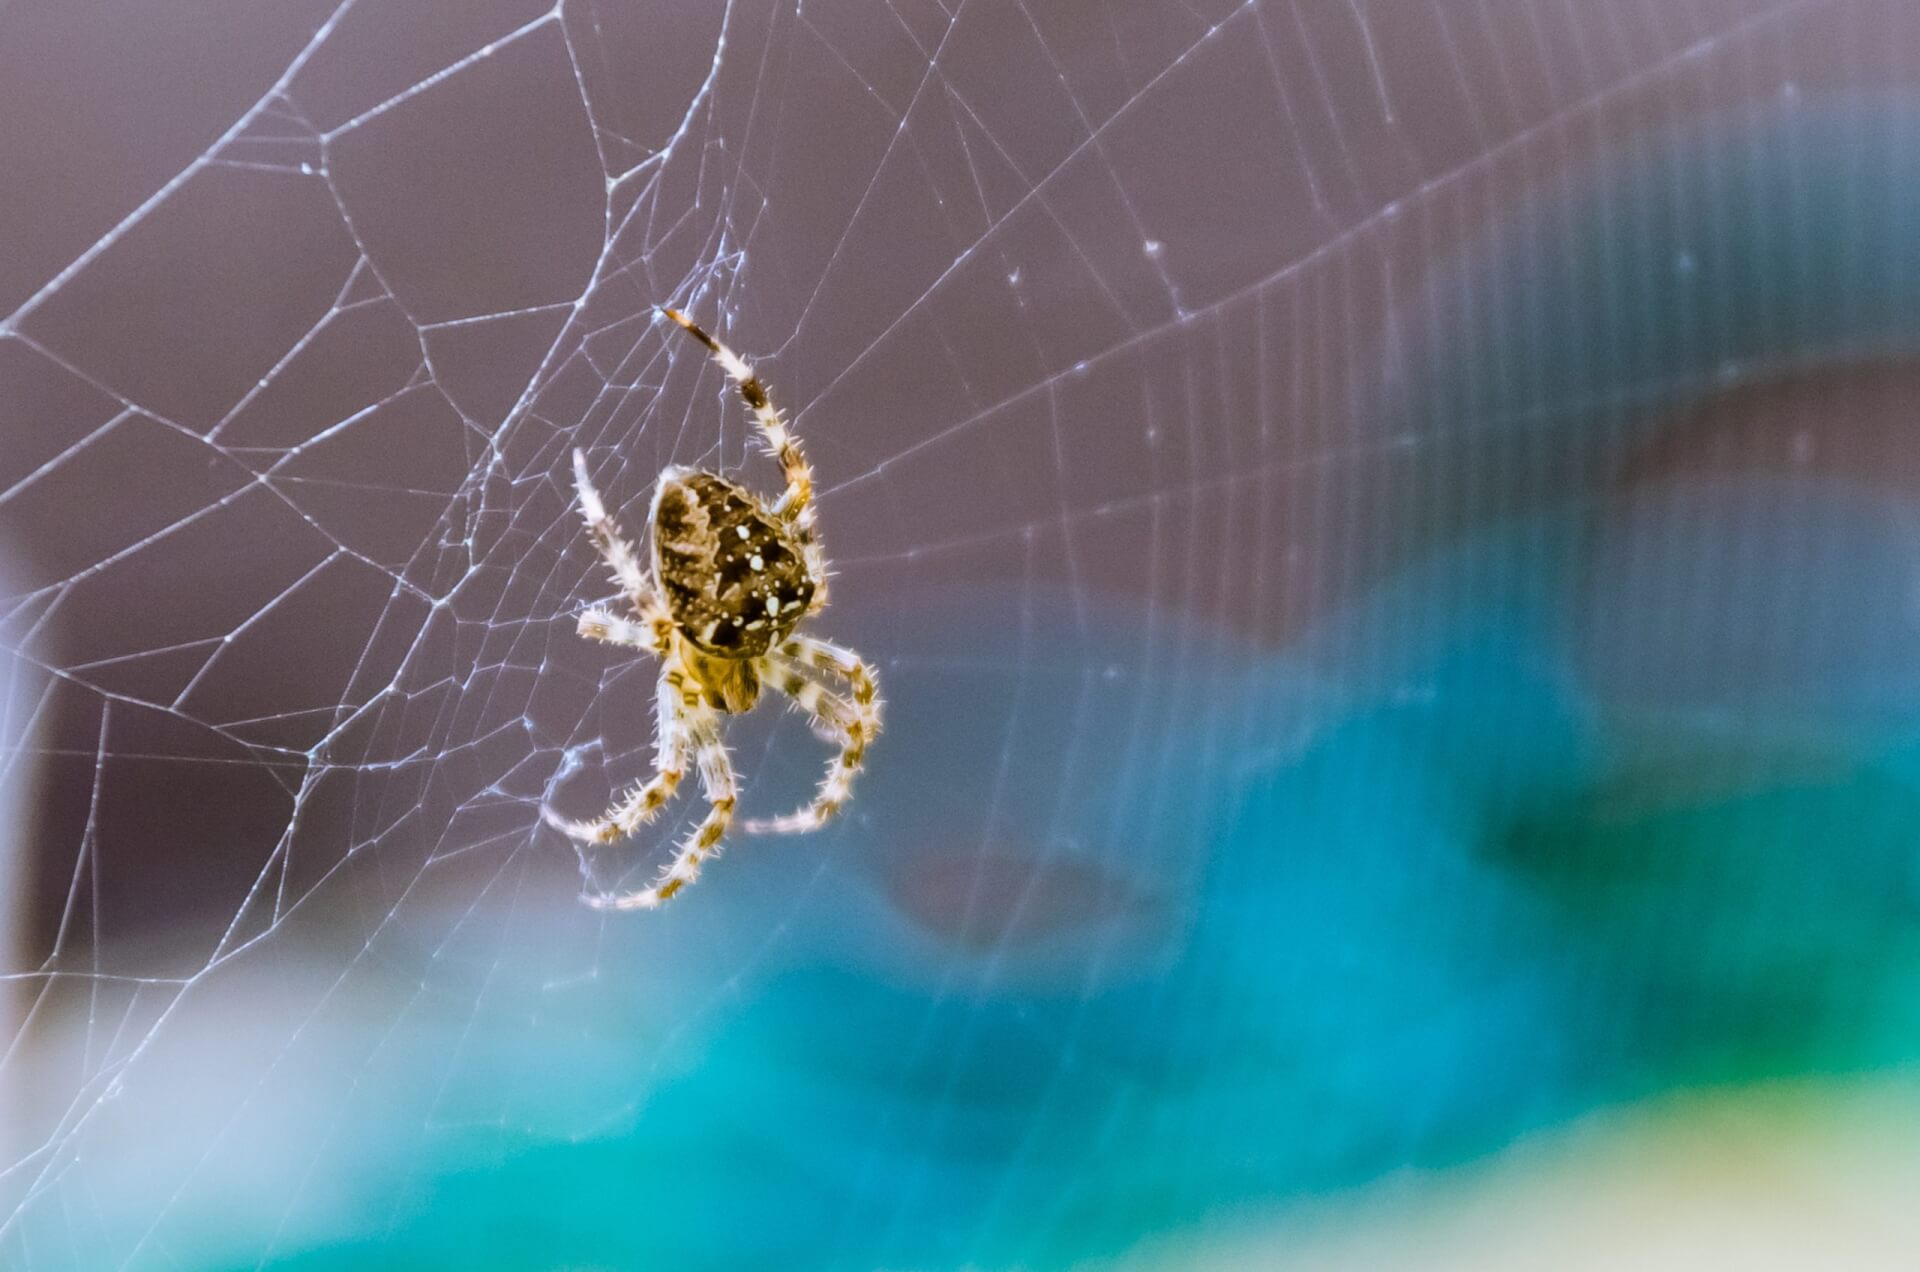 Picture of Spiders: Photo Gallery of Spider Image. Waltham Pest Services